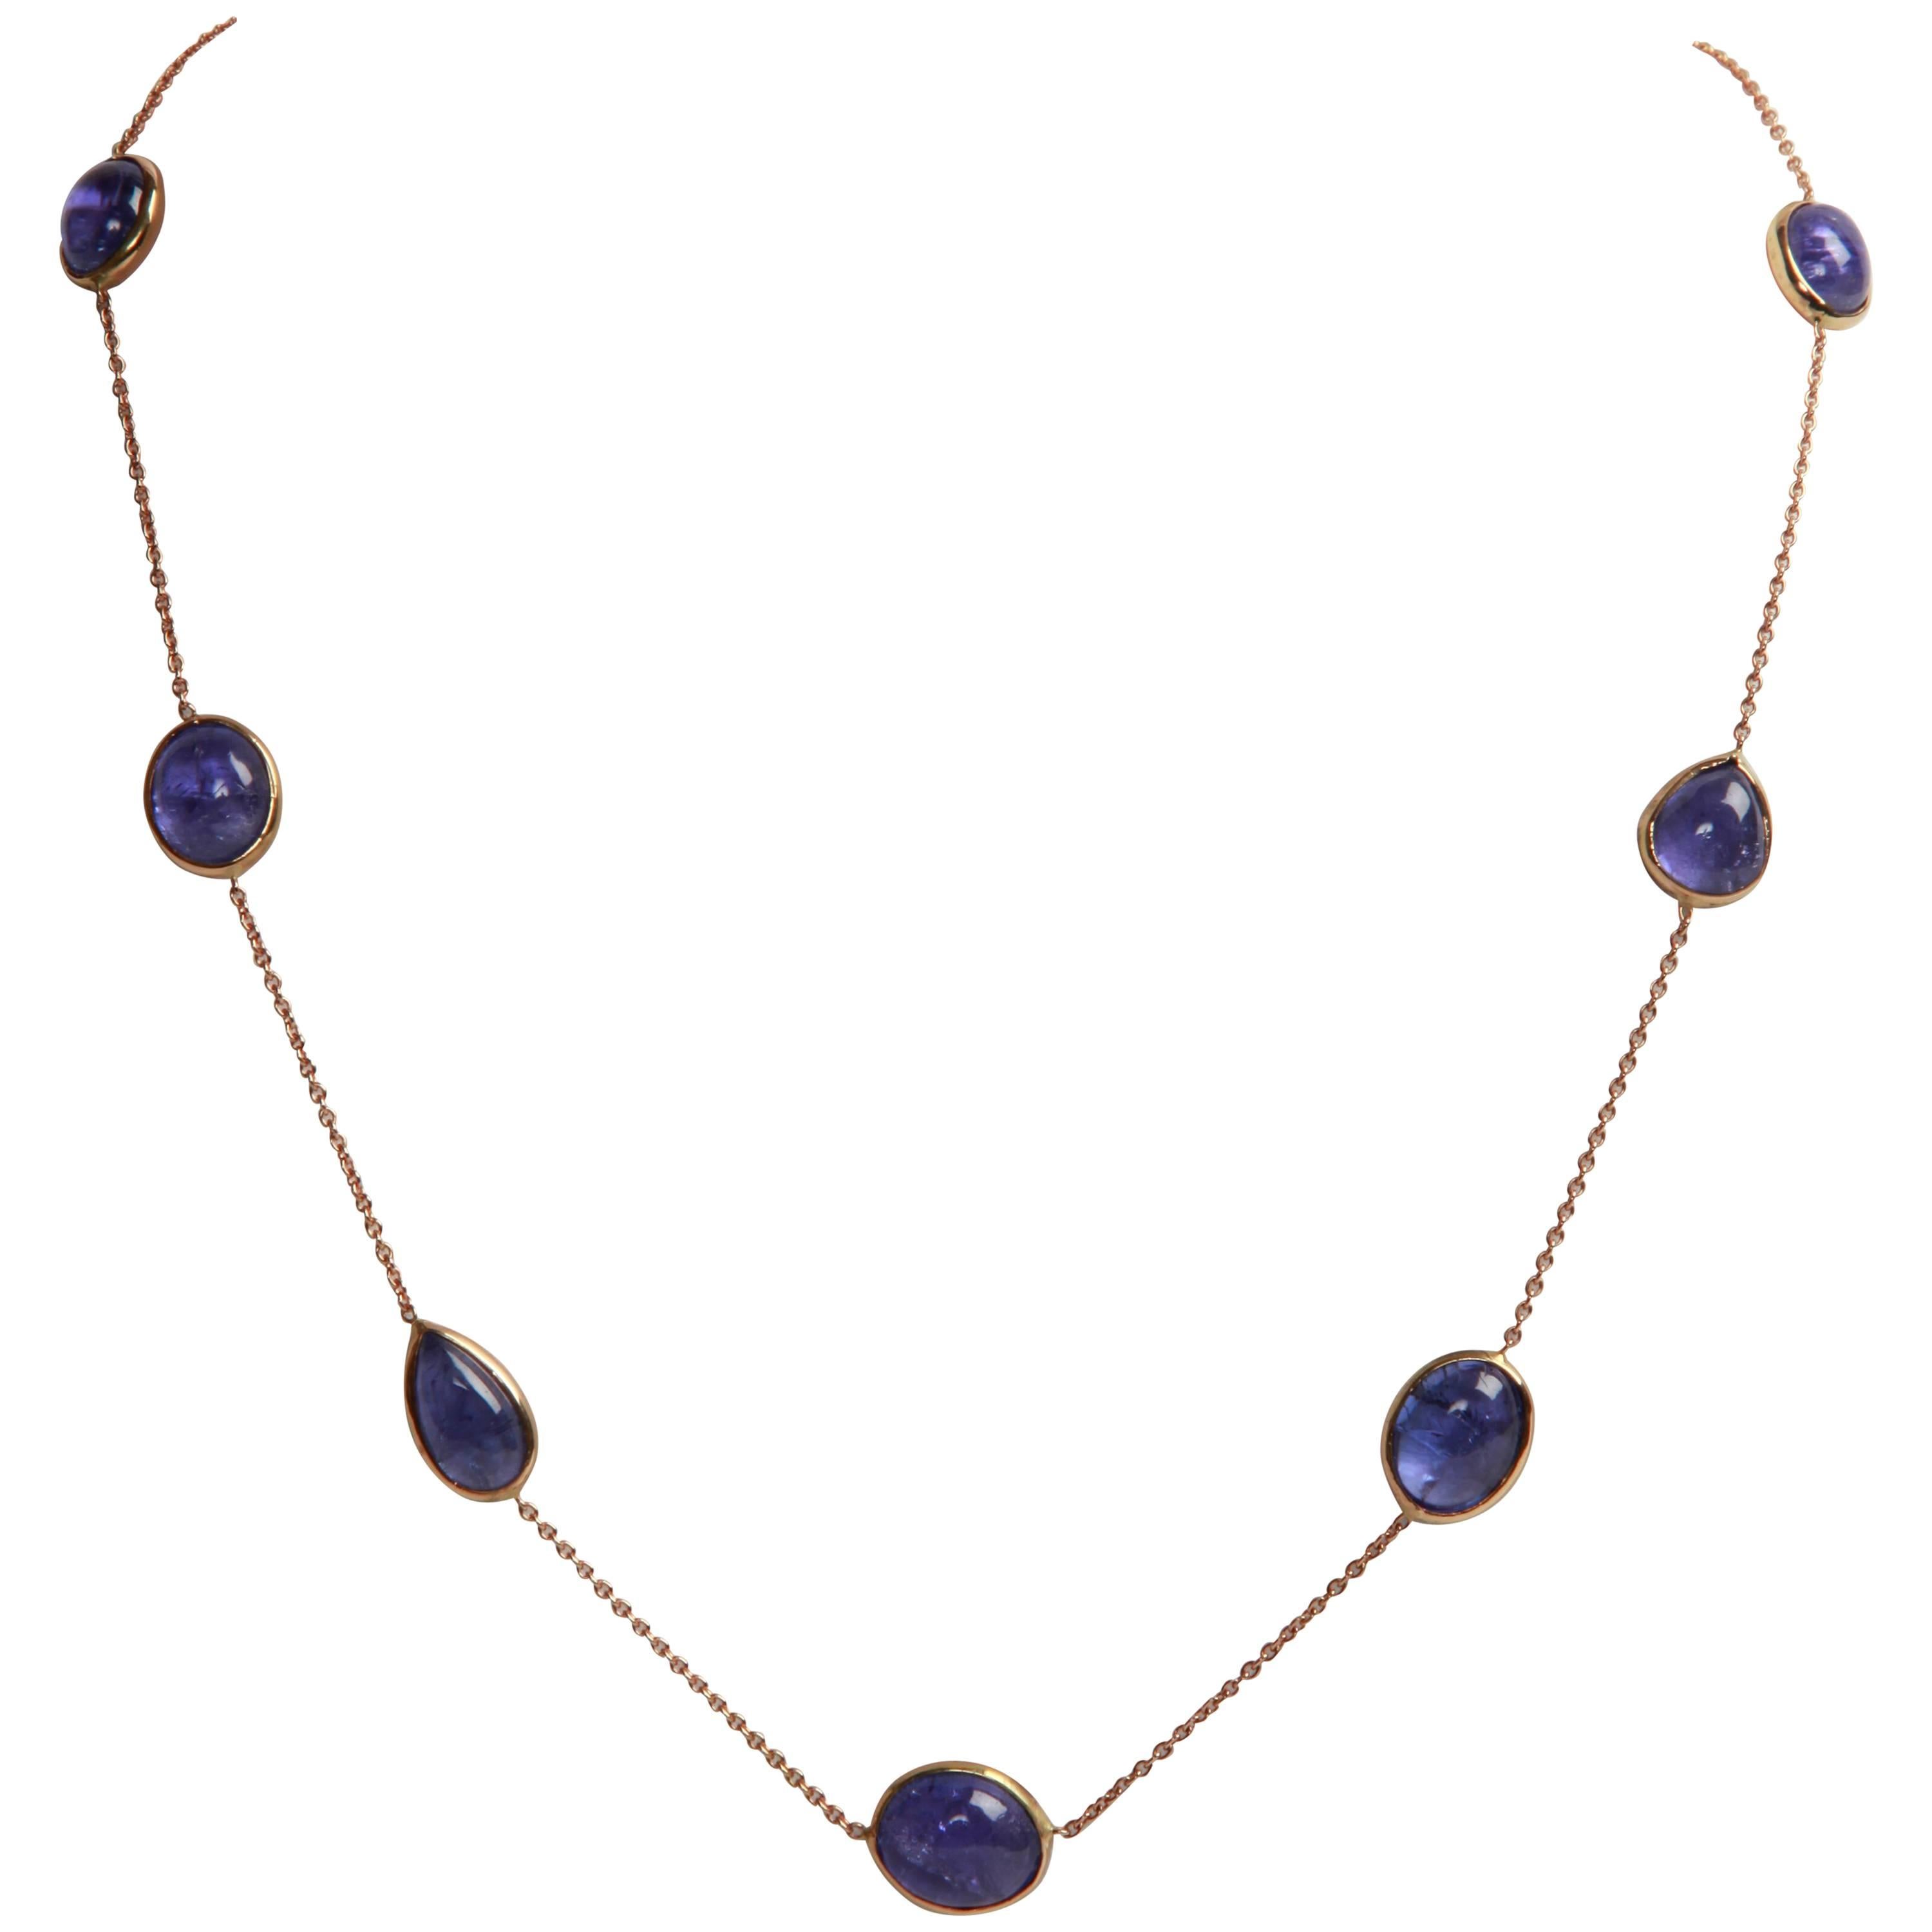  Tanzanite Cabochons and Gold Necklace by Marion Jeantet